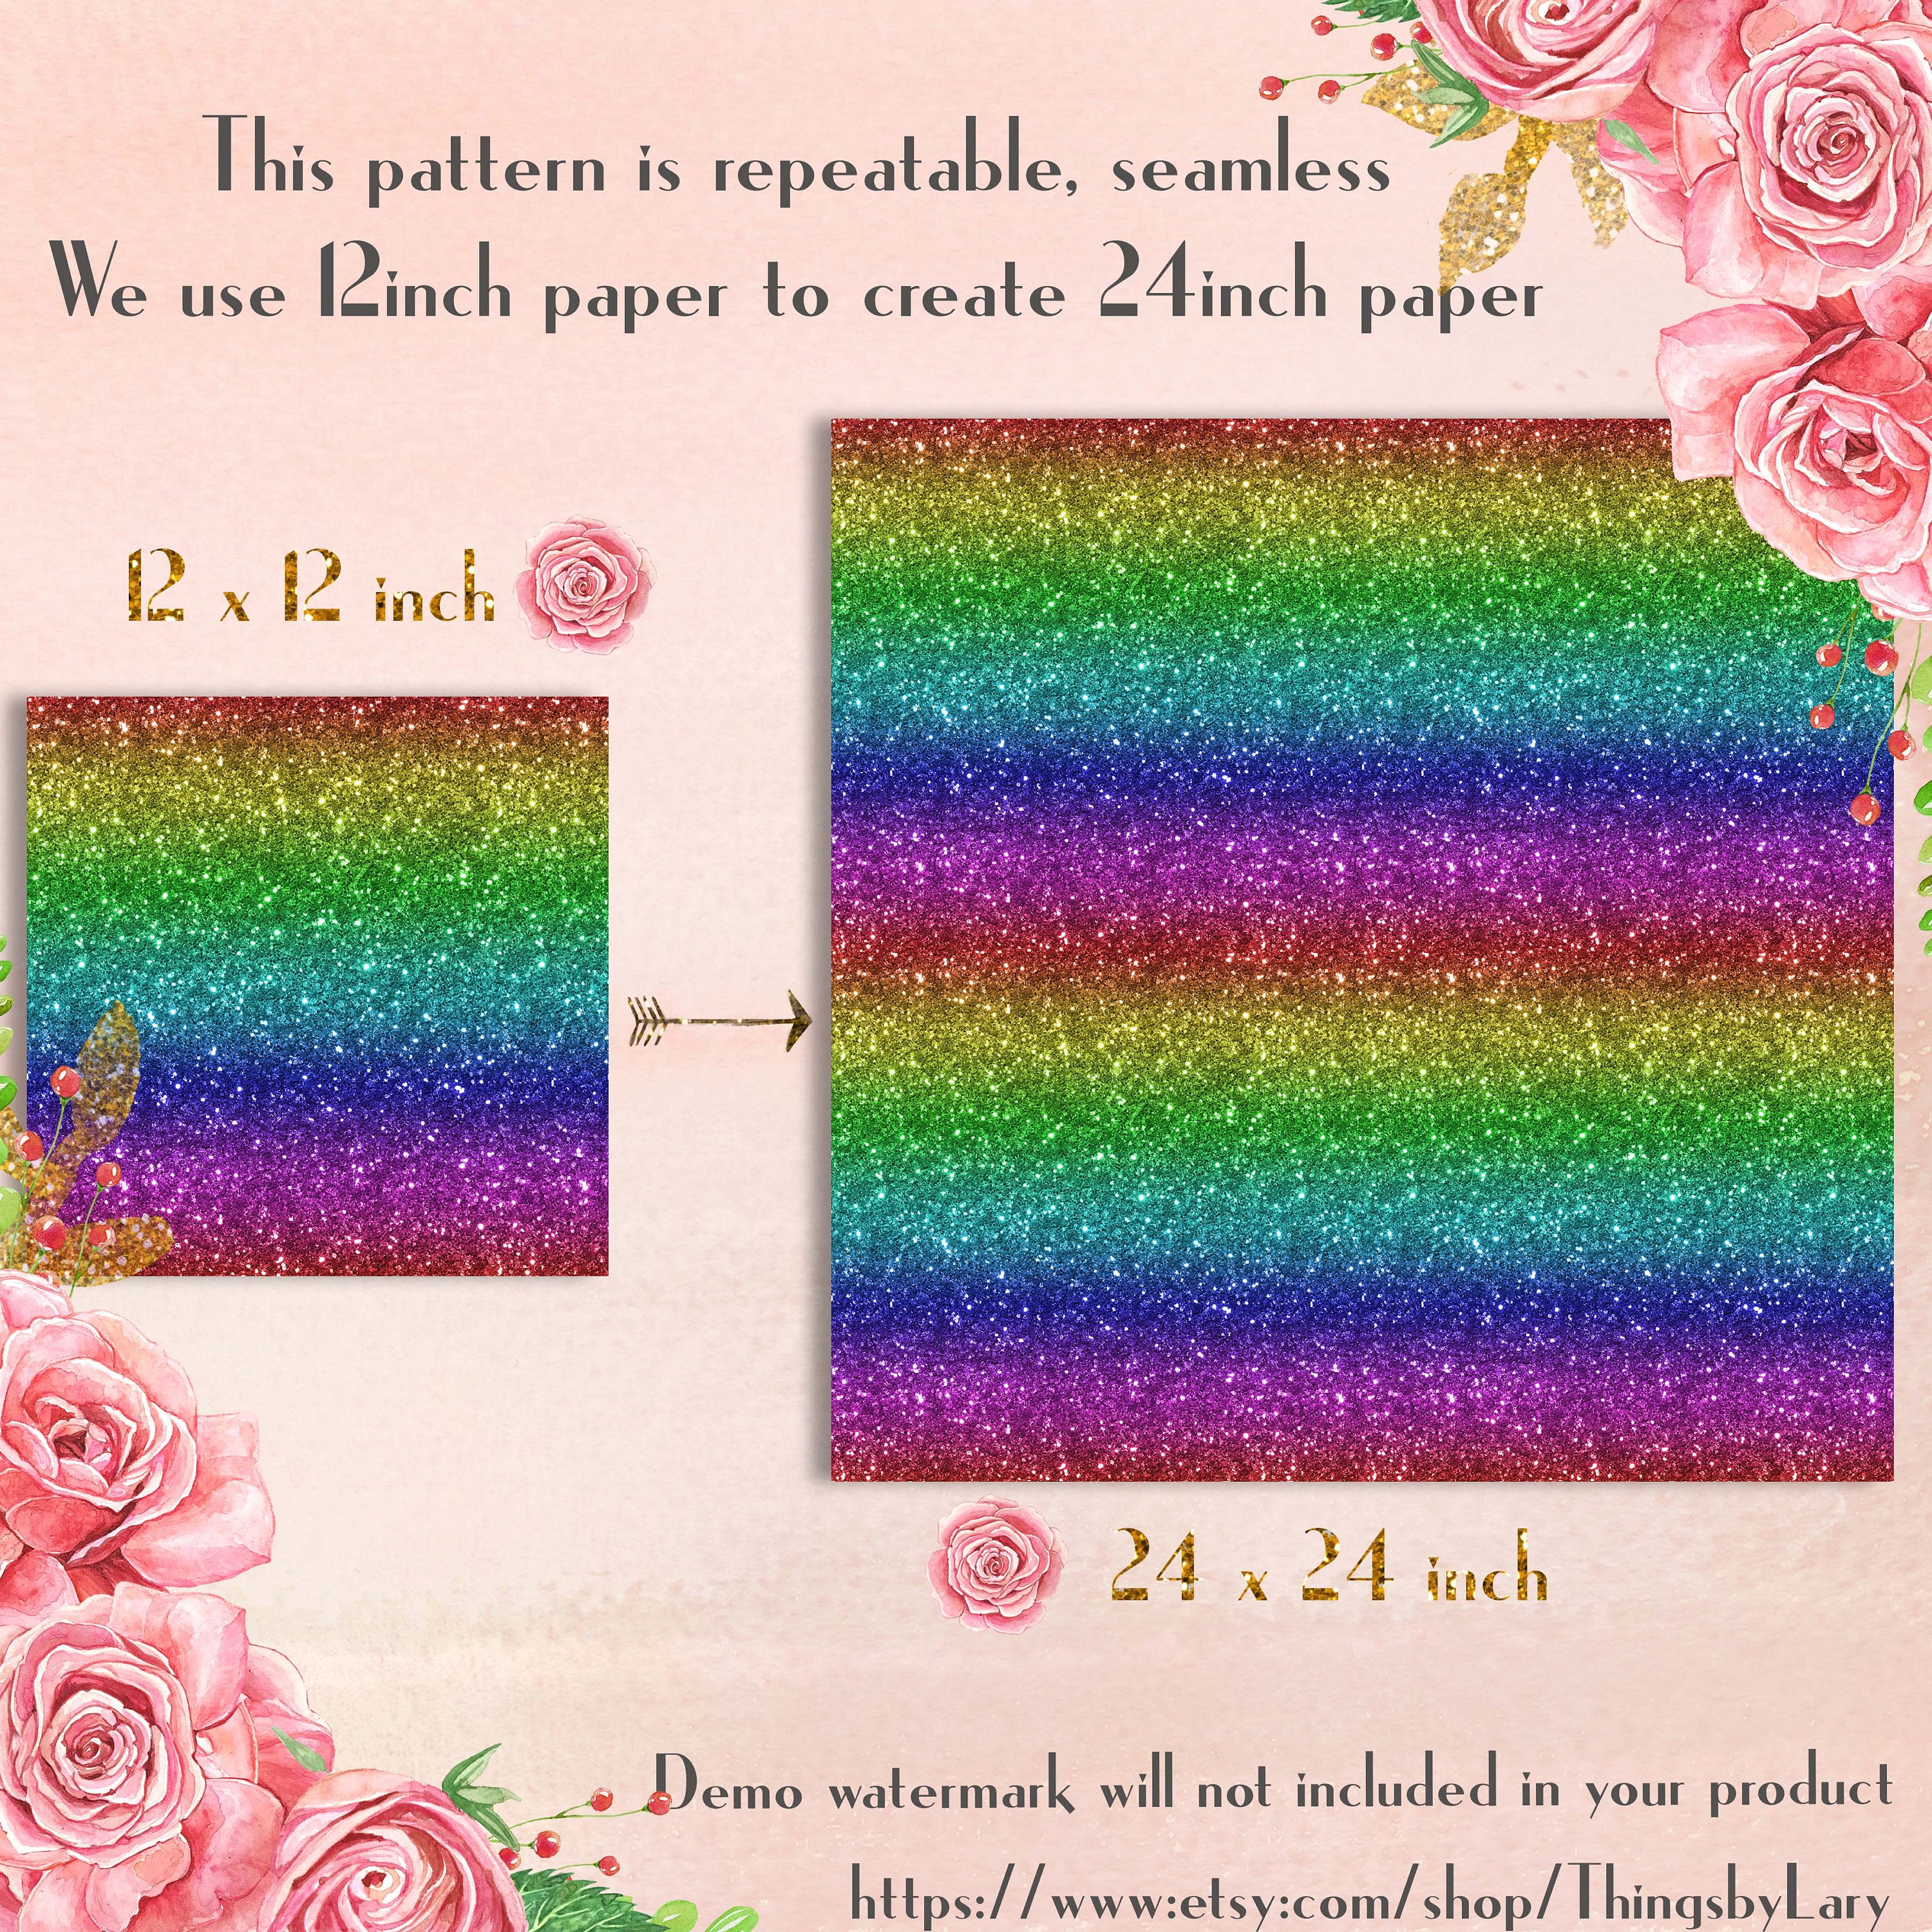 18 Seamless Rainbow Shimmering Glitter Digital Papers 12x12&quot; 300 Dpi Instant Download Commercial Use Scrapbook Colorful Festival Unicorn